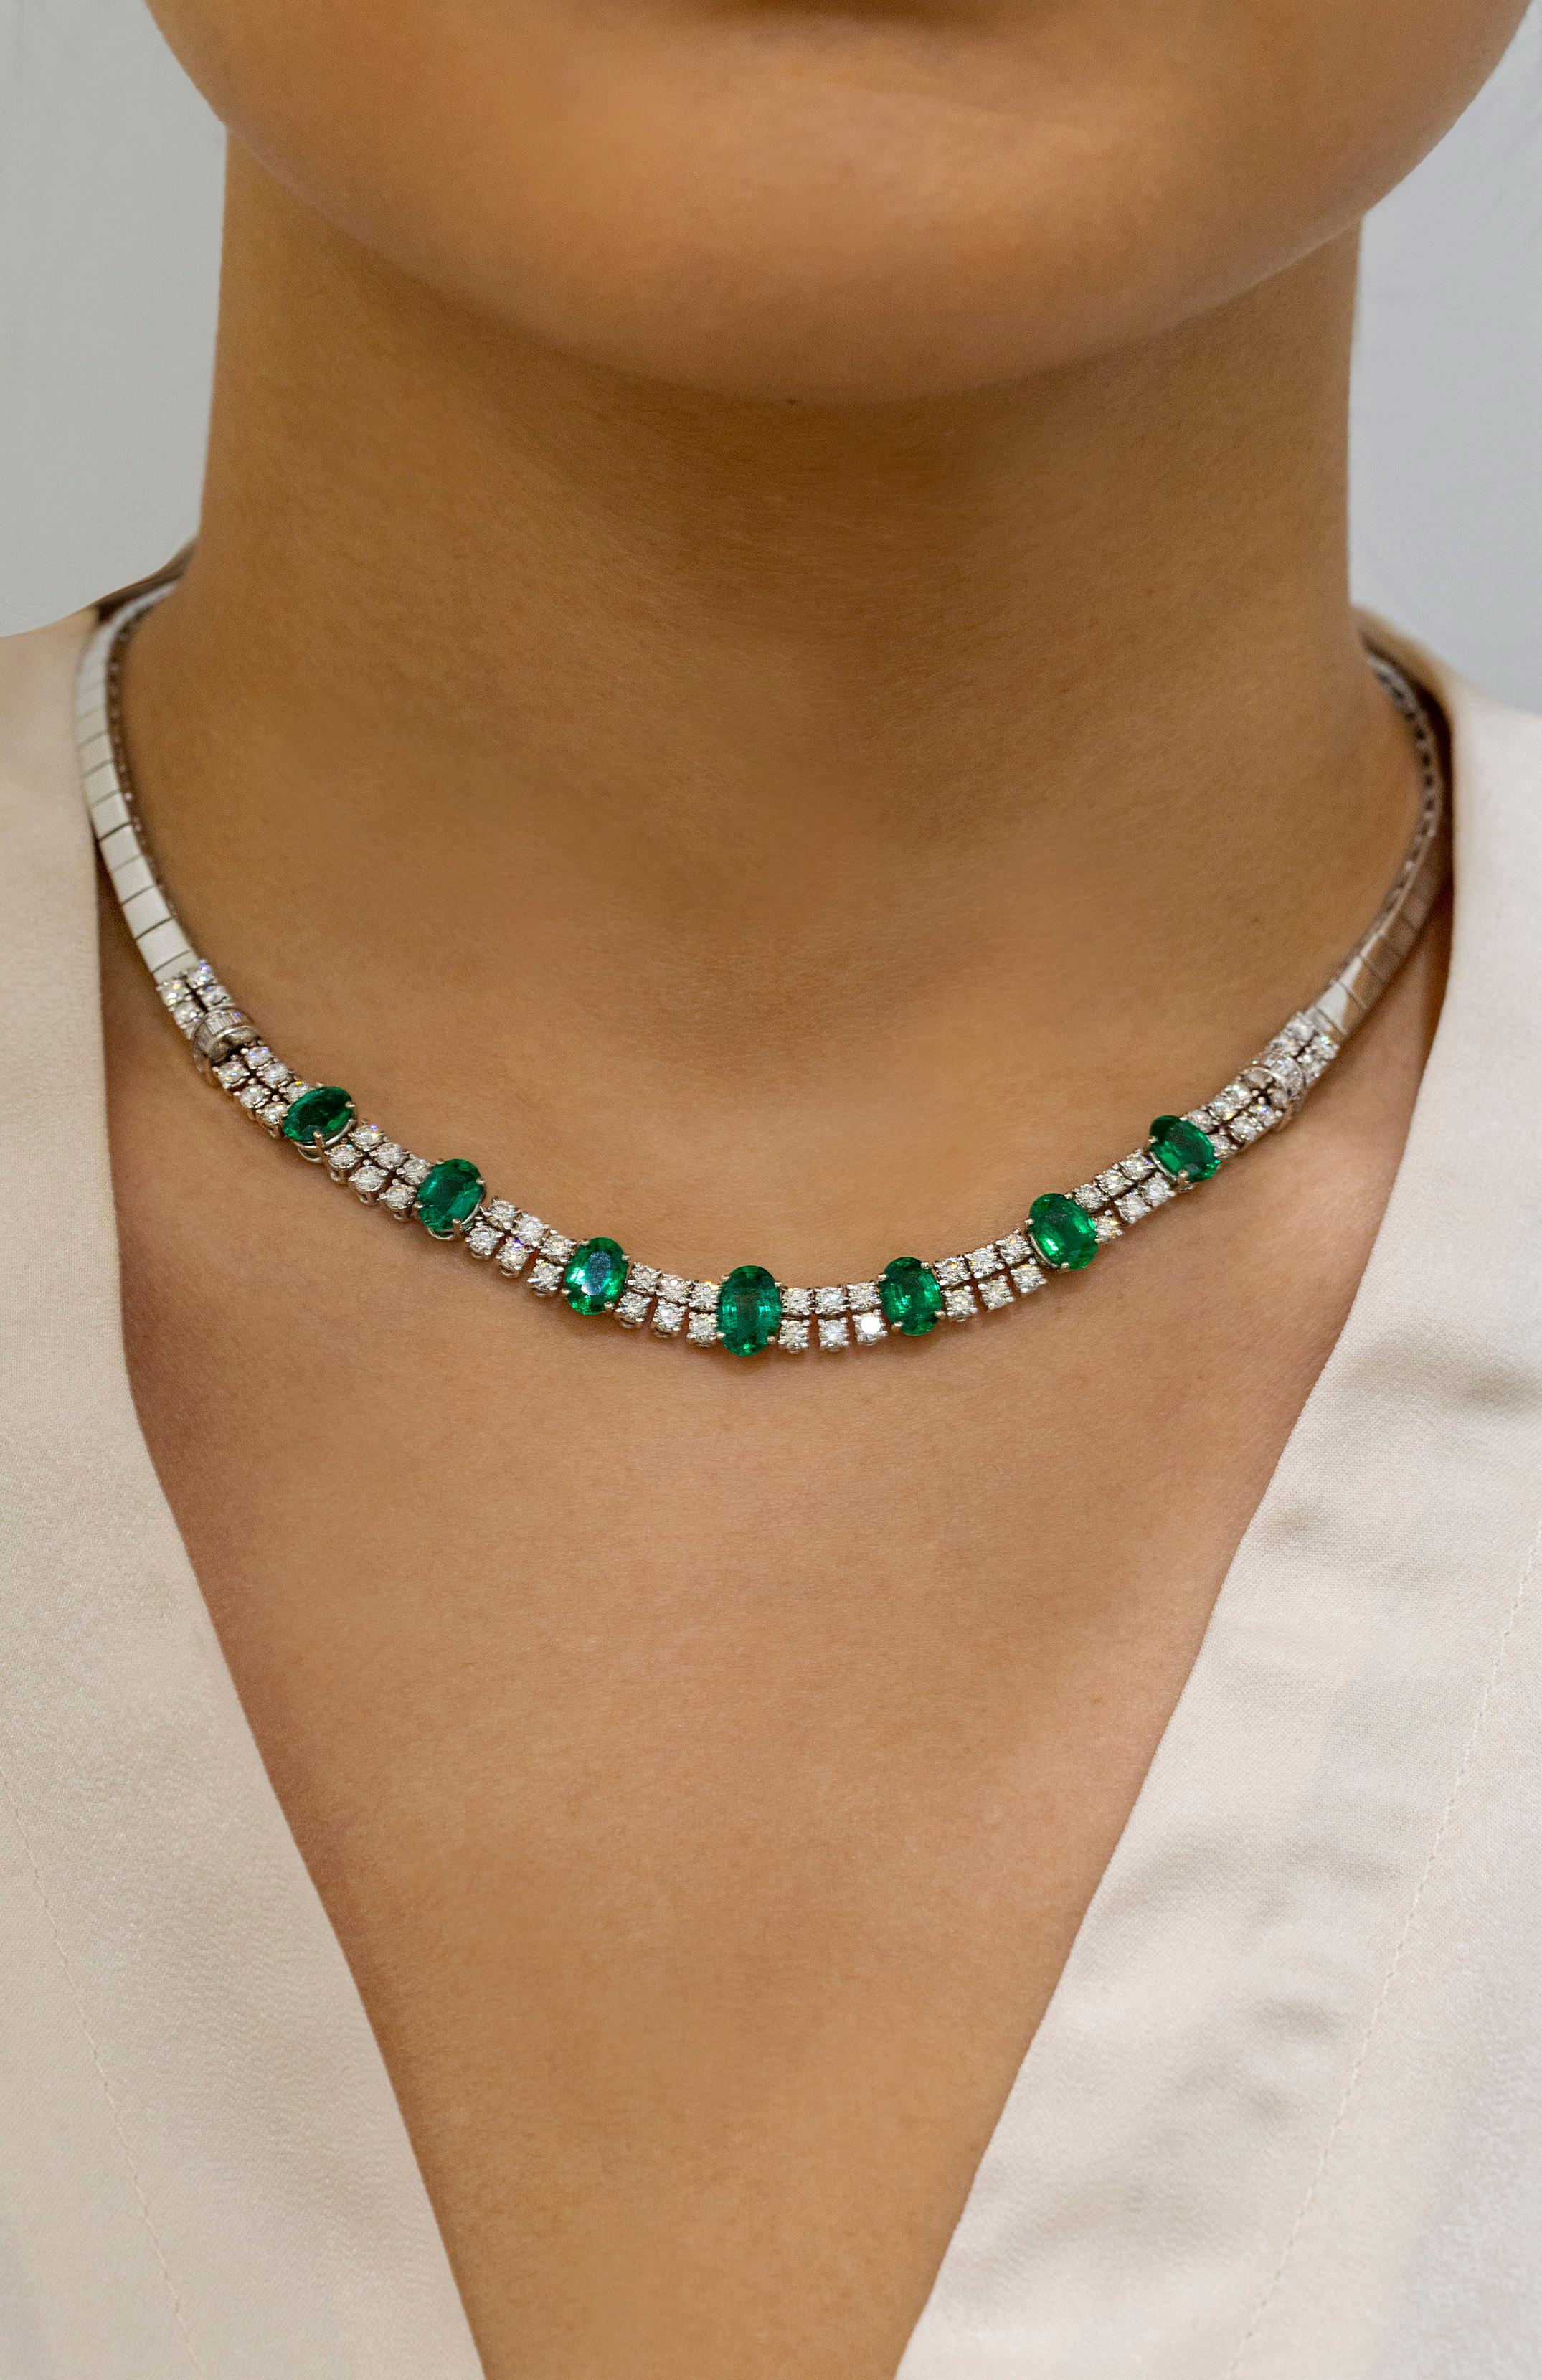 Contemporary Roman Malakov 9.70 Carat Total, Oval Cut Green Emerald and Diamond Necklace For Sale